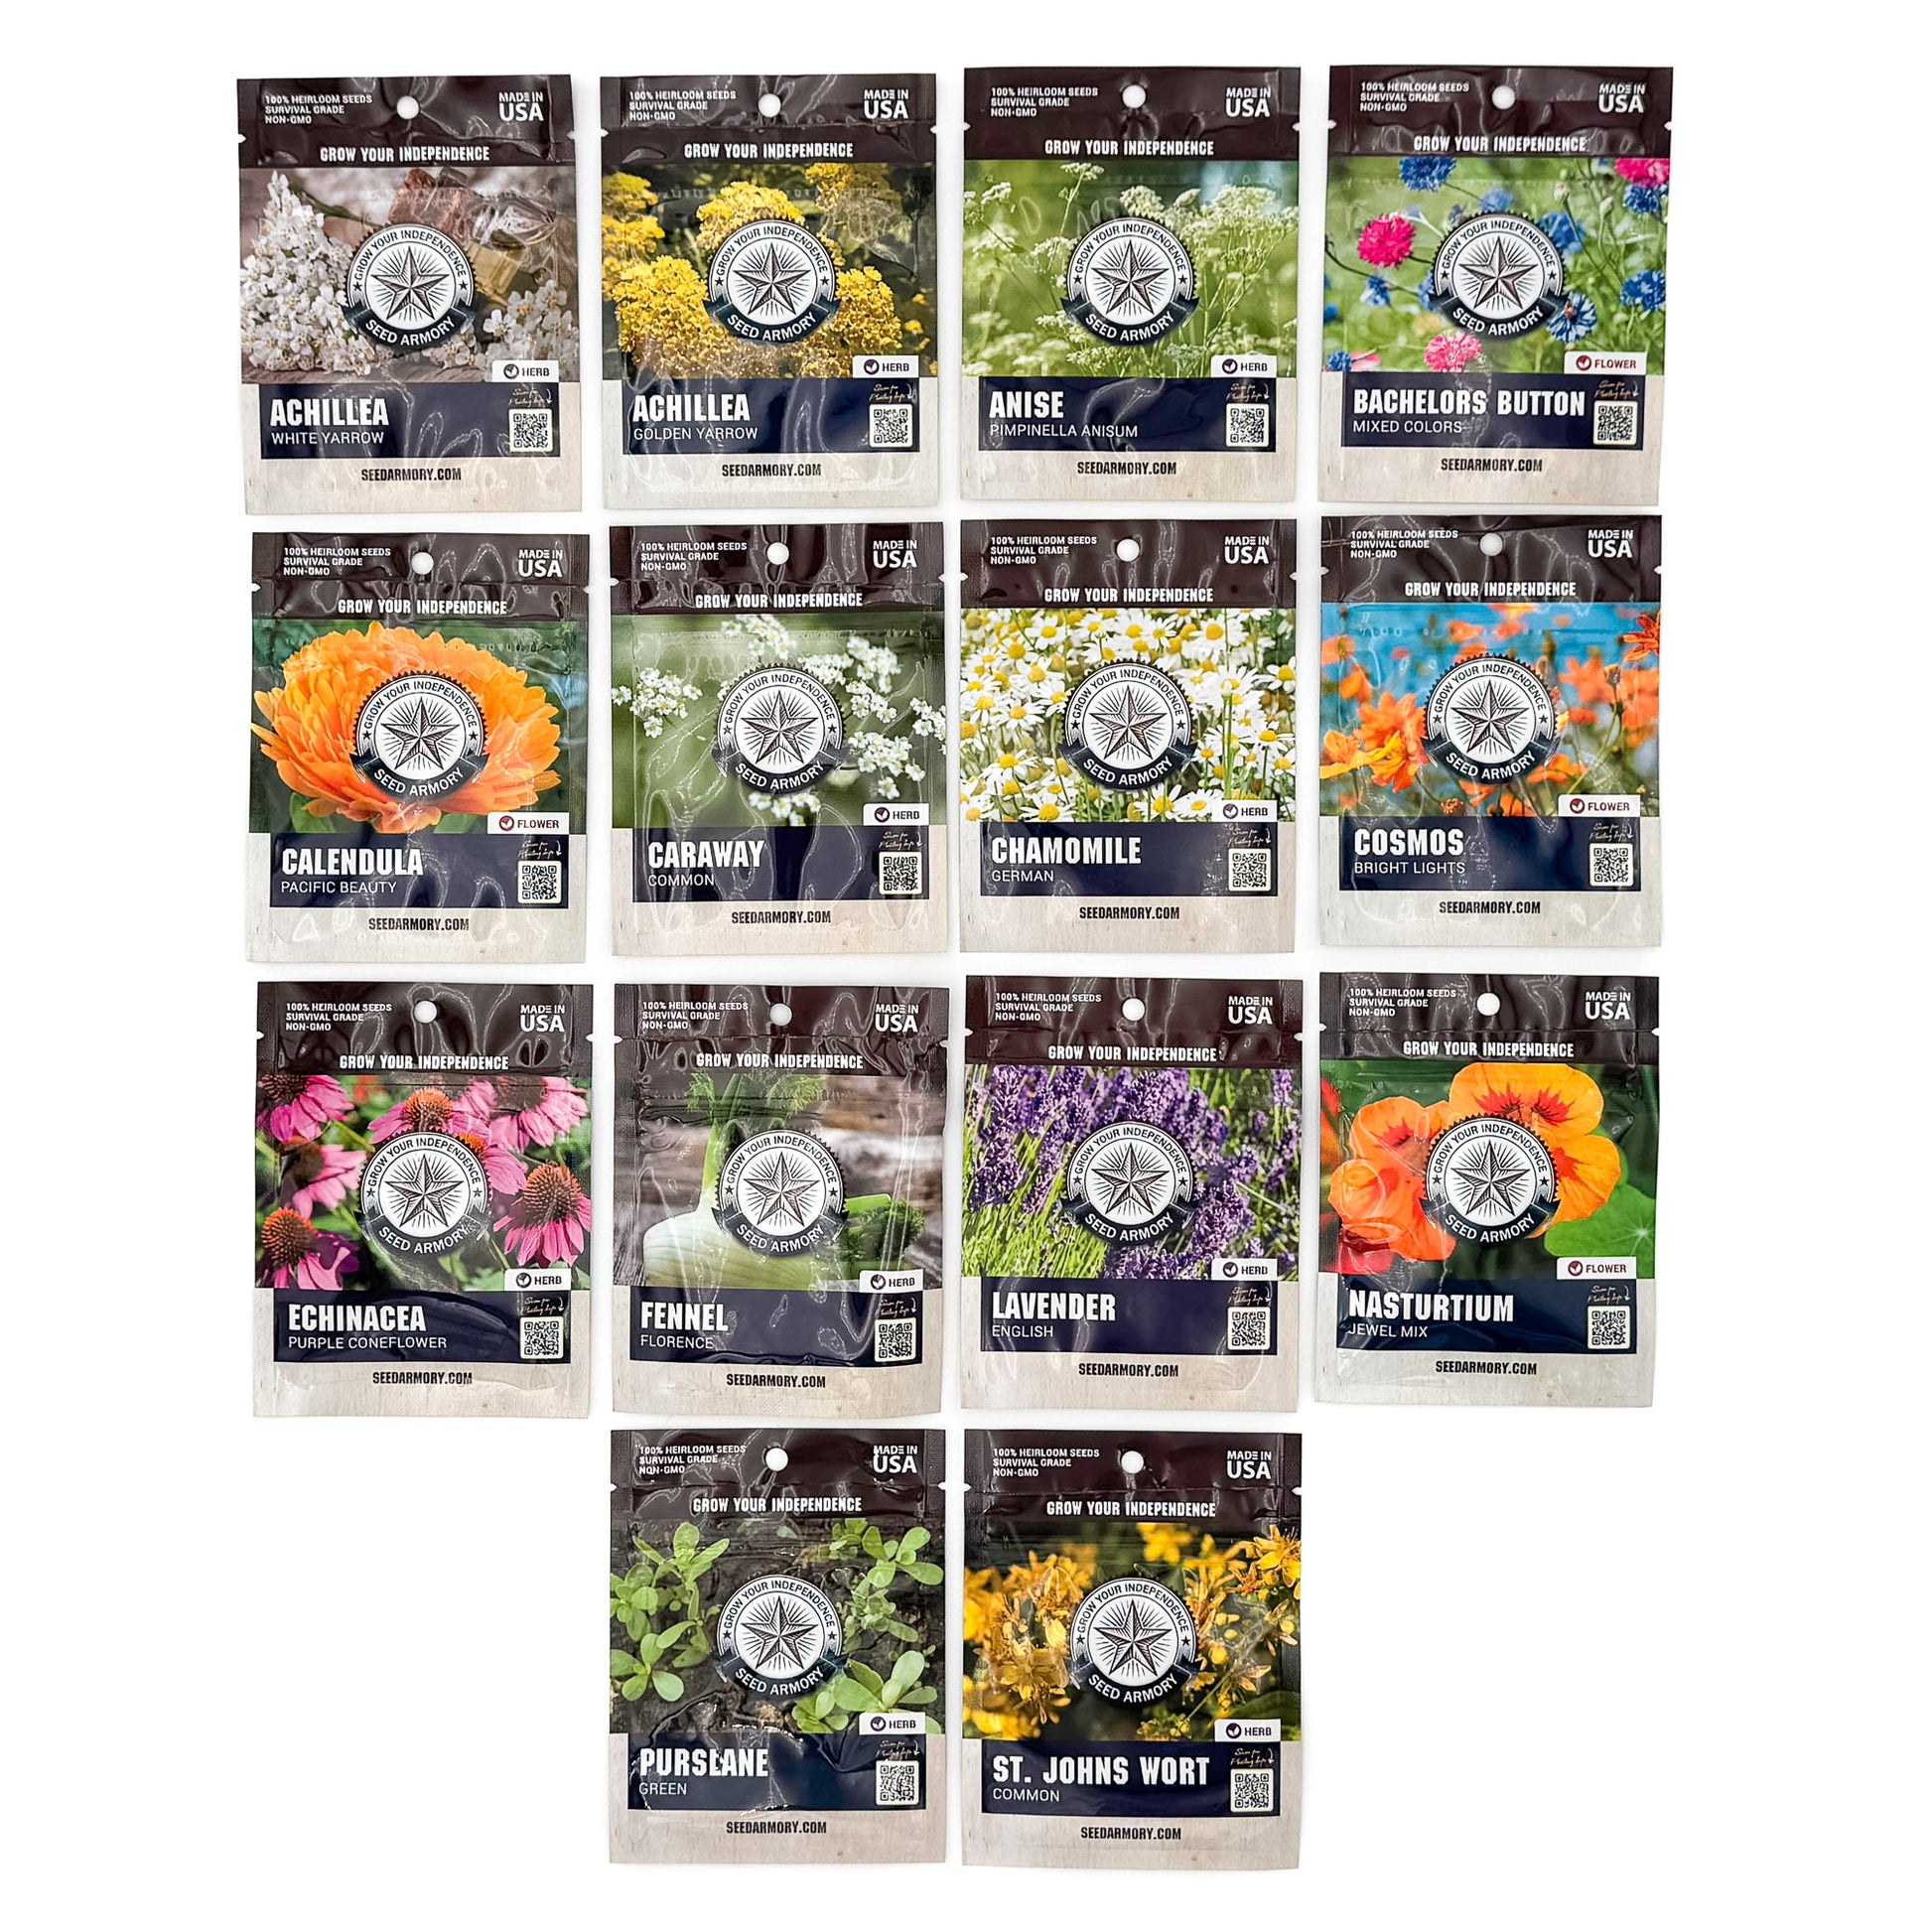 View of the 14 seed packets included in the Medicinal Survival Seed Vault